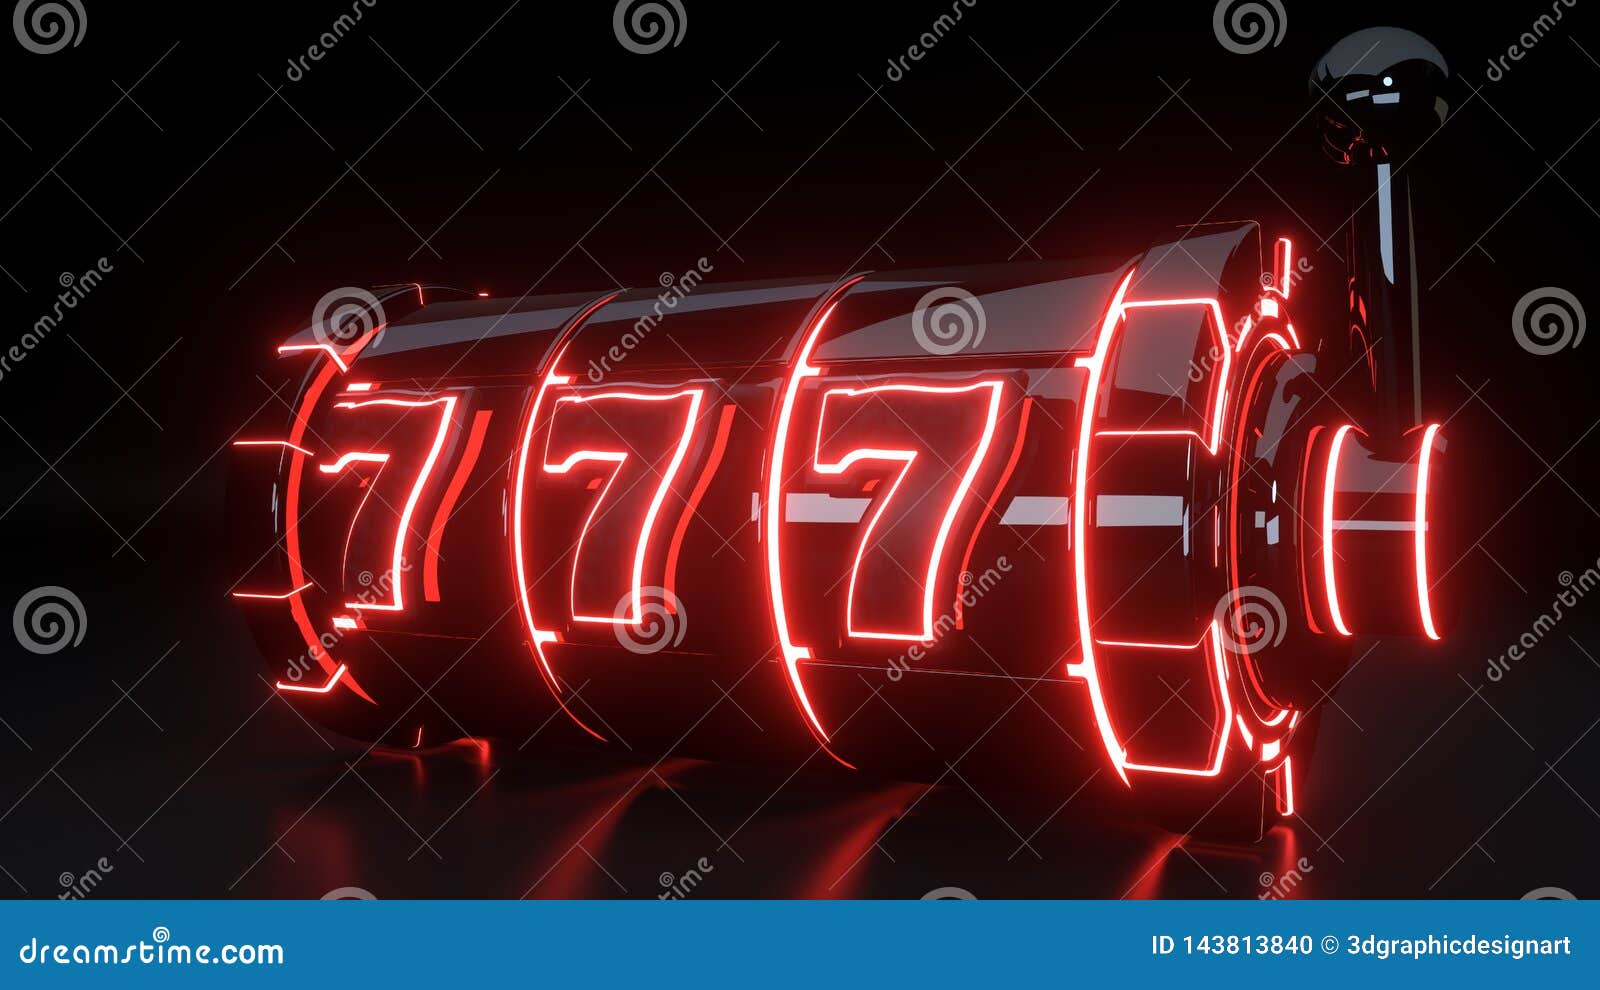 casino slot machine gambling concept with neon red lights  on the black background - 3d 